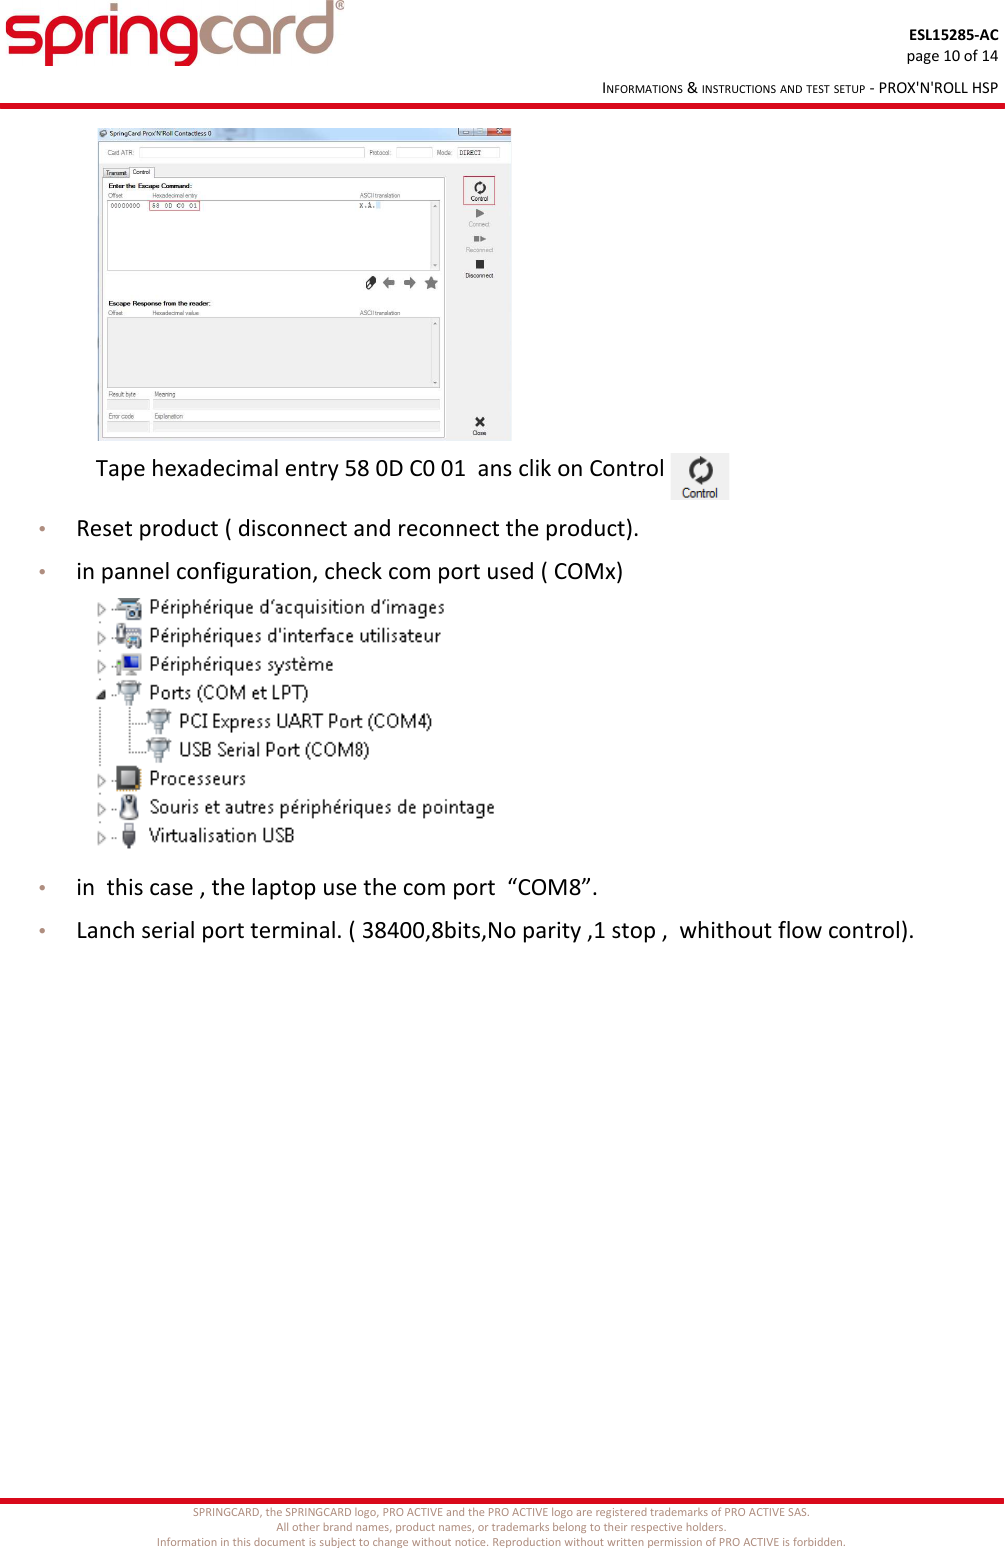 ESL15285-ACpage 10 of 14INFORMATIONS &amp; INSTRUCTIONS AND TEST SETUP - PROX&apos;N&apos;ROLL HSP                                 Tape hexadecimal entry 58 0D C0 01  ans clik on Control •Reset product ( disconnect and reconnect the product).•in pannel configuration, check com port used ( COMx)•in  this case , the laptop use the com port  “COM8”.•Lanch serial port terminal. ( 38400,8bits,No parity ,1 stop ,  whithout flow control).SPRINGCARD, the SPRINGCARD logo, PRO ACTIVE and the PRO ACTIVE logo are registered trademarks of PRO ACTIVE SAS.All other brand names, product names, or trademarks belong to their respective holders.Information in this document is subject to change without notice. Reproduction without written permission of PRO ACTIVE is forbidden.